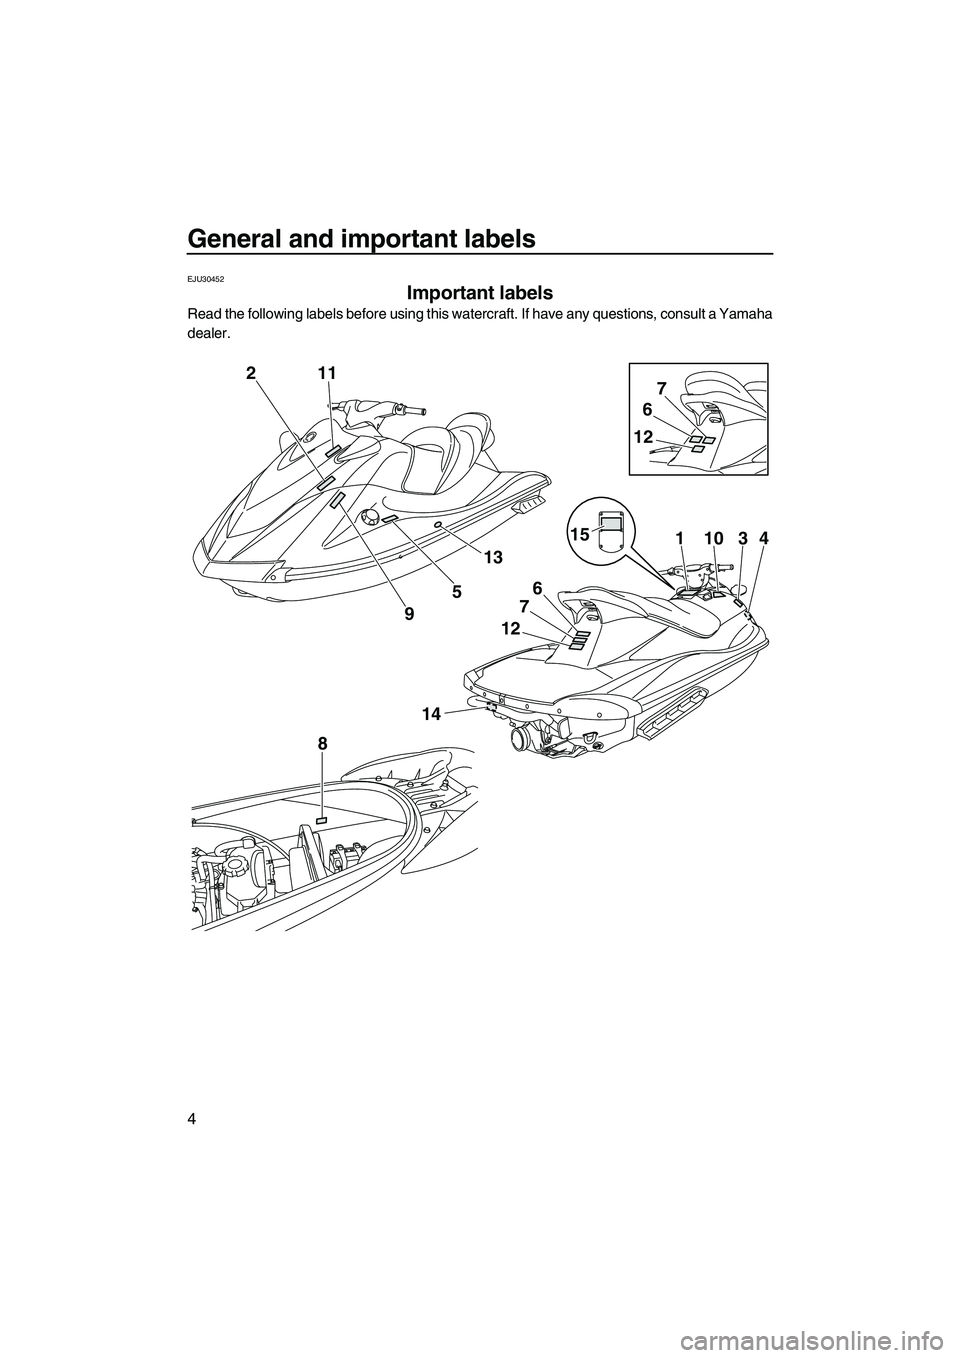 YAMAHA VX SPORT 2013  Owners Manual General and important labels
4
EJU30452
Important labels 
Read the following labels before using this watercraft. If have any questions, consult a Yamaha
dealer.
2
14
8
12
6
7
15
6
7
12
11034
11
9
5
1